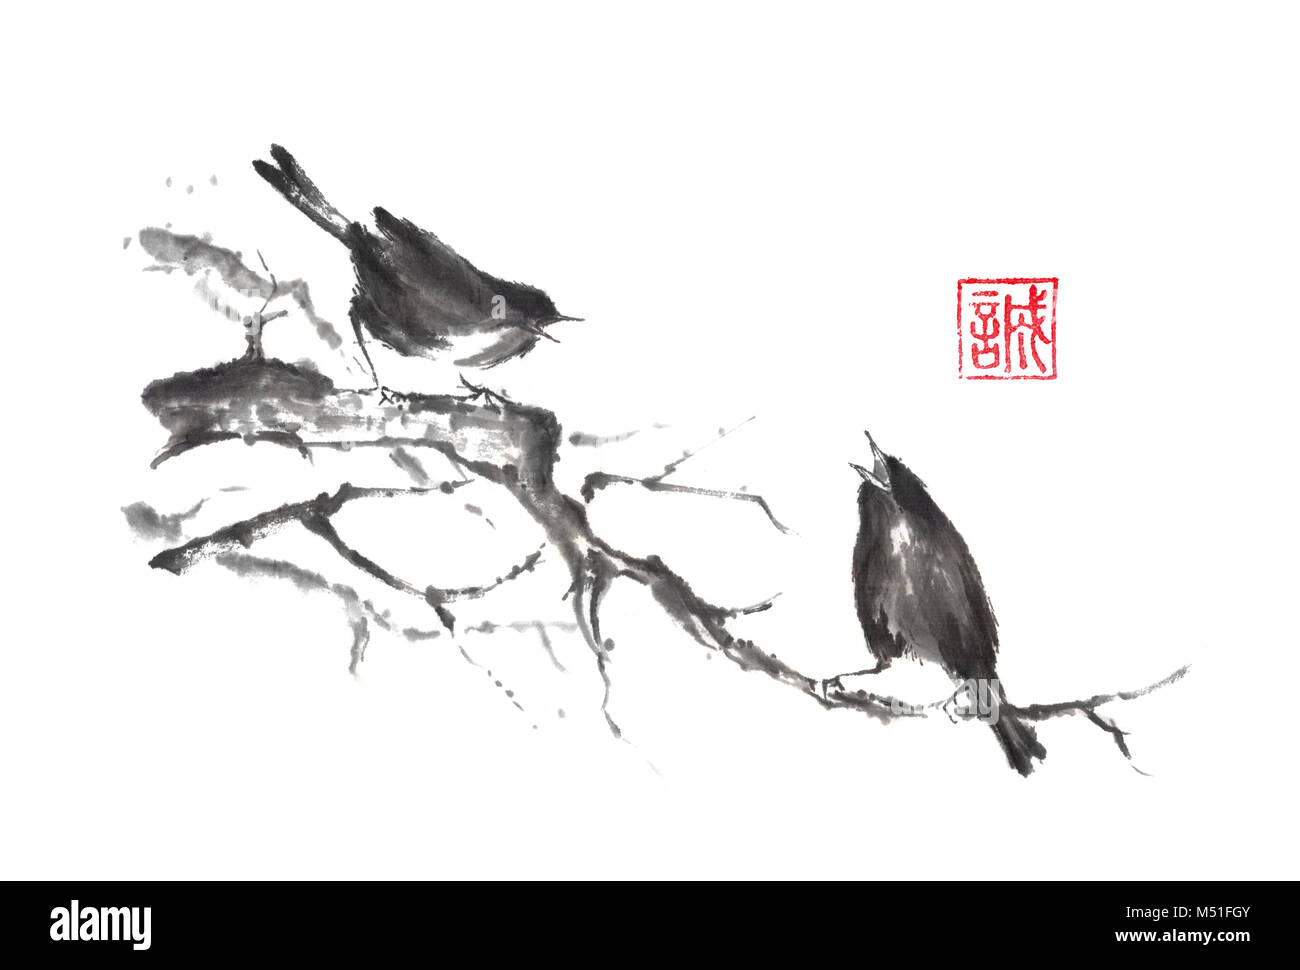 Japanese style sumi-e painting with two singing birds on a tree. Hieroglyph featured means sincerity. Great for greeting cards or texture design. Stock Photo